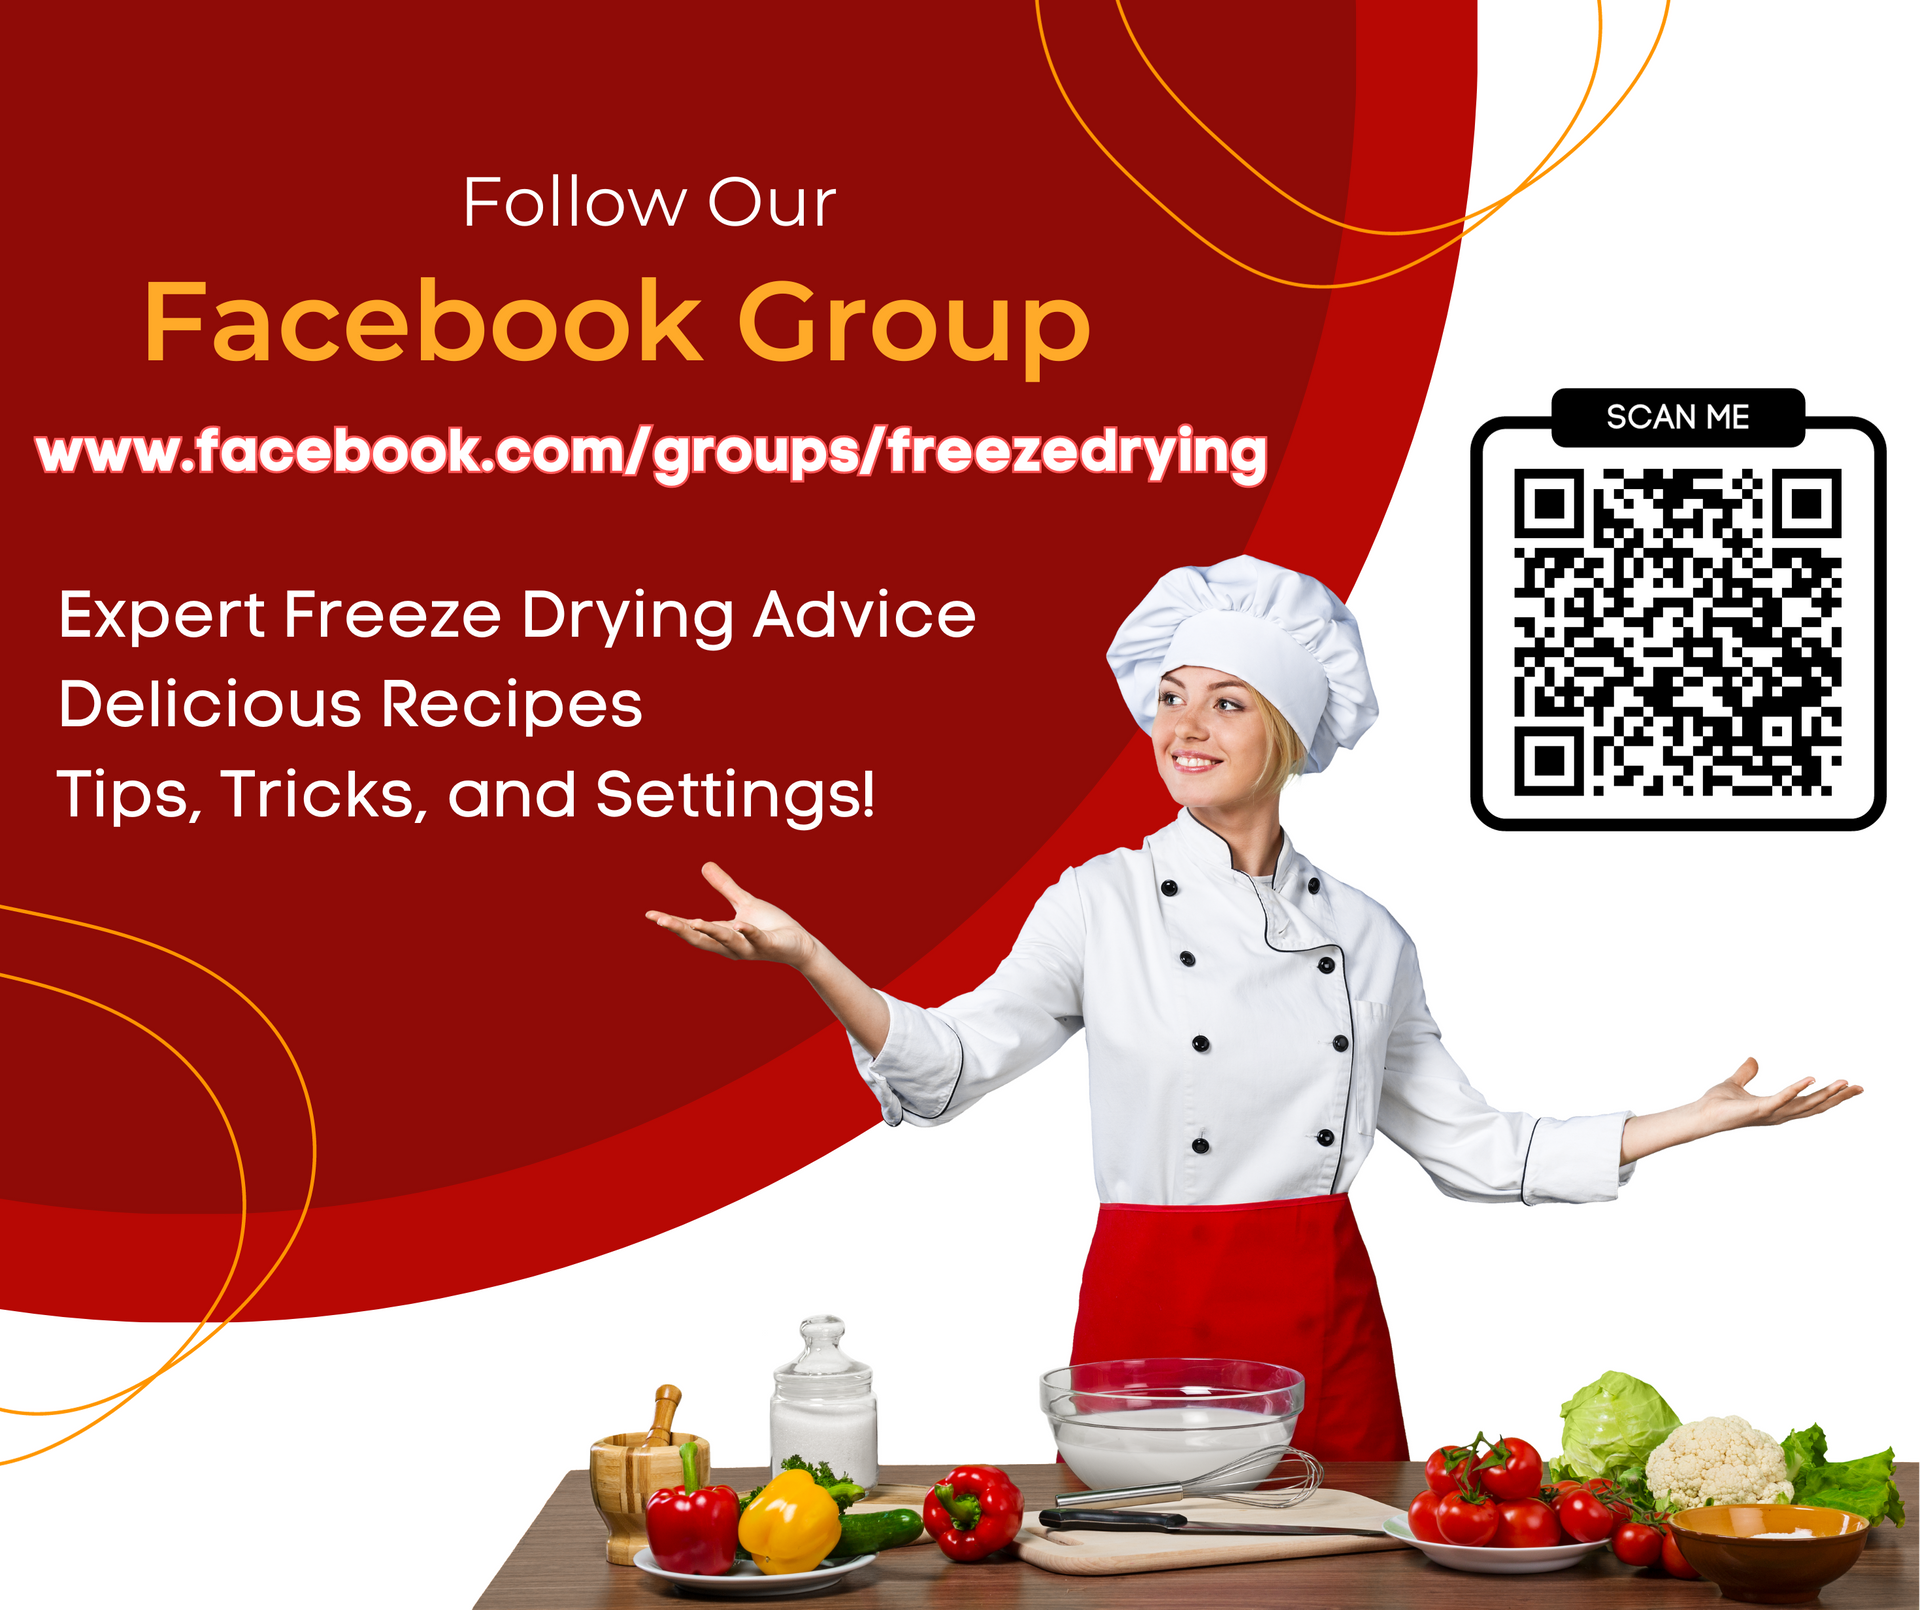 a facebook group for freeze drying advice and delicious recipes